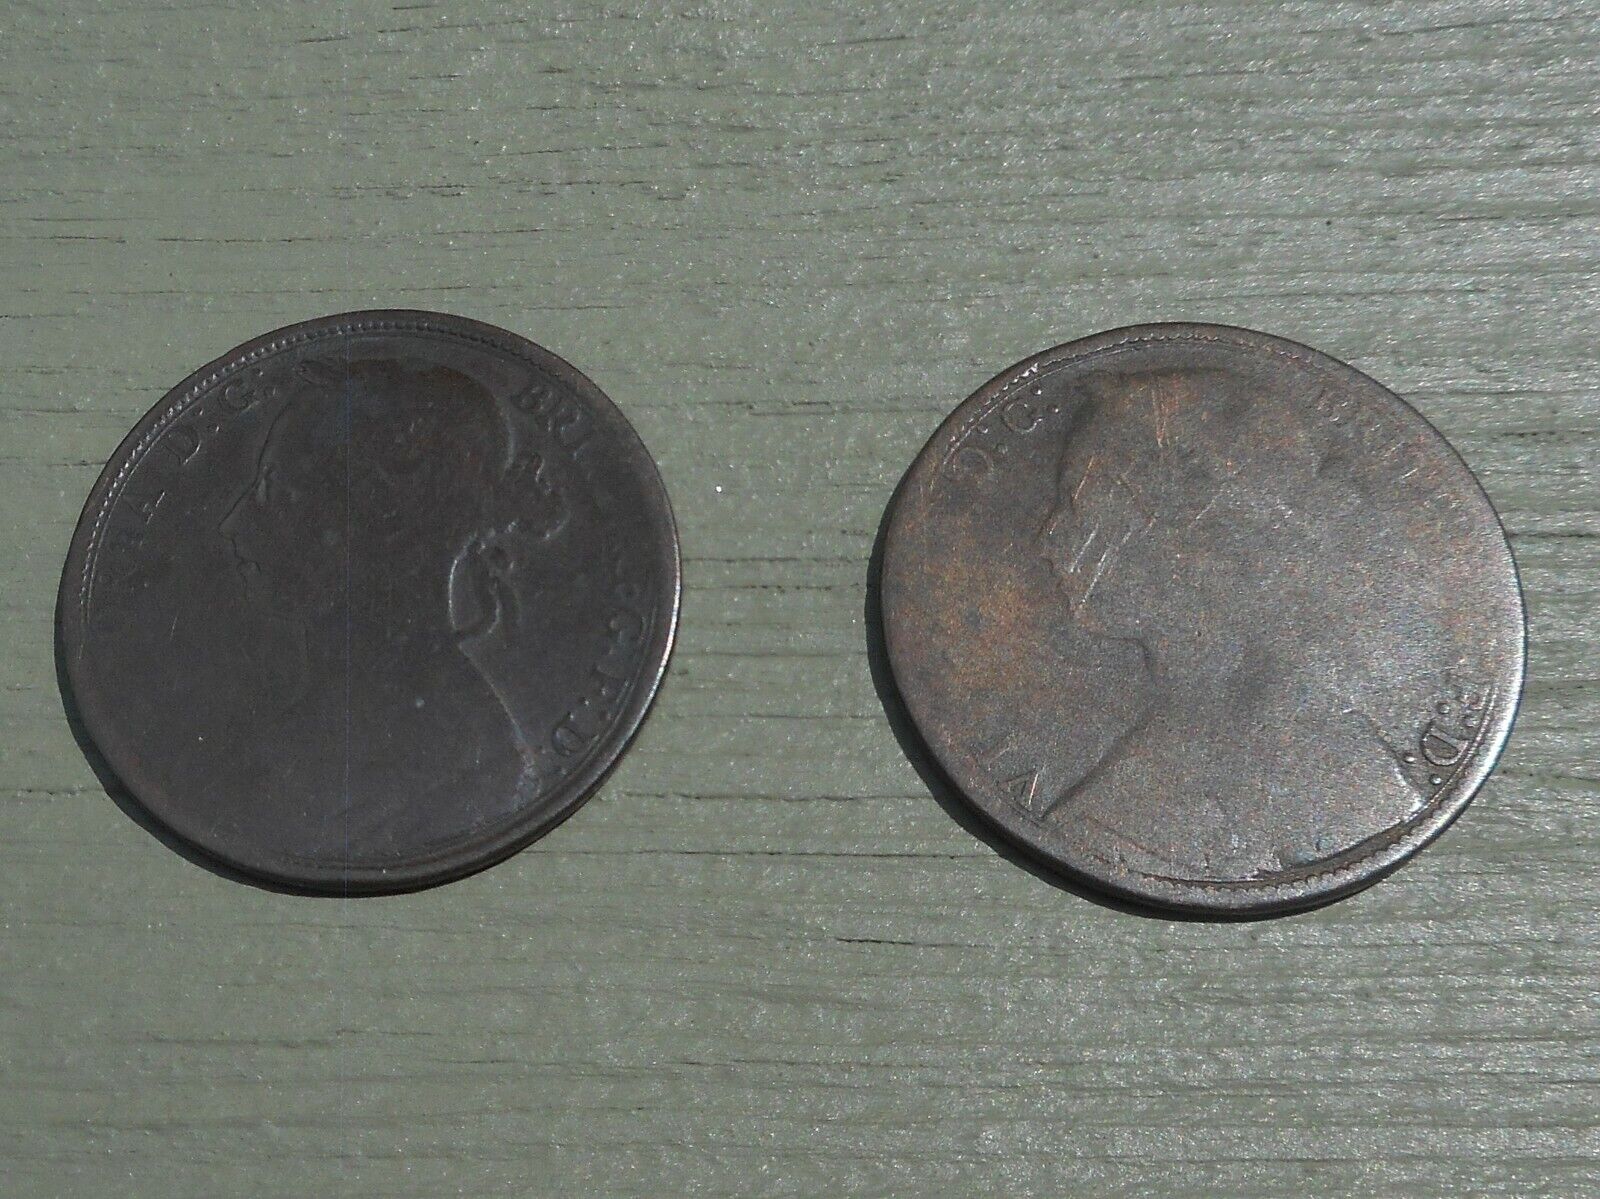 1877 & 1890 LOT OF 2 COINS BRITAIN One Penny 1 Pence Cent Queen Victoria Без бренда - фотография #10